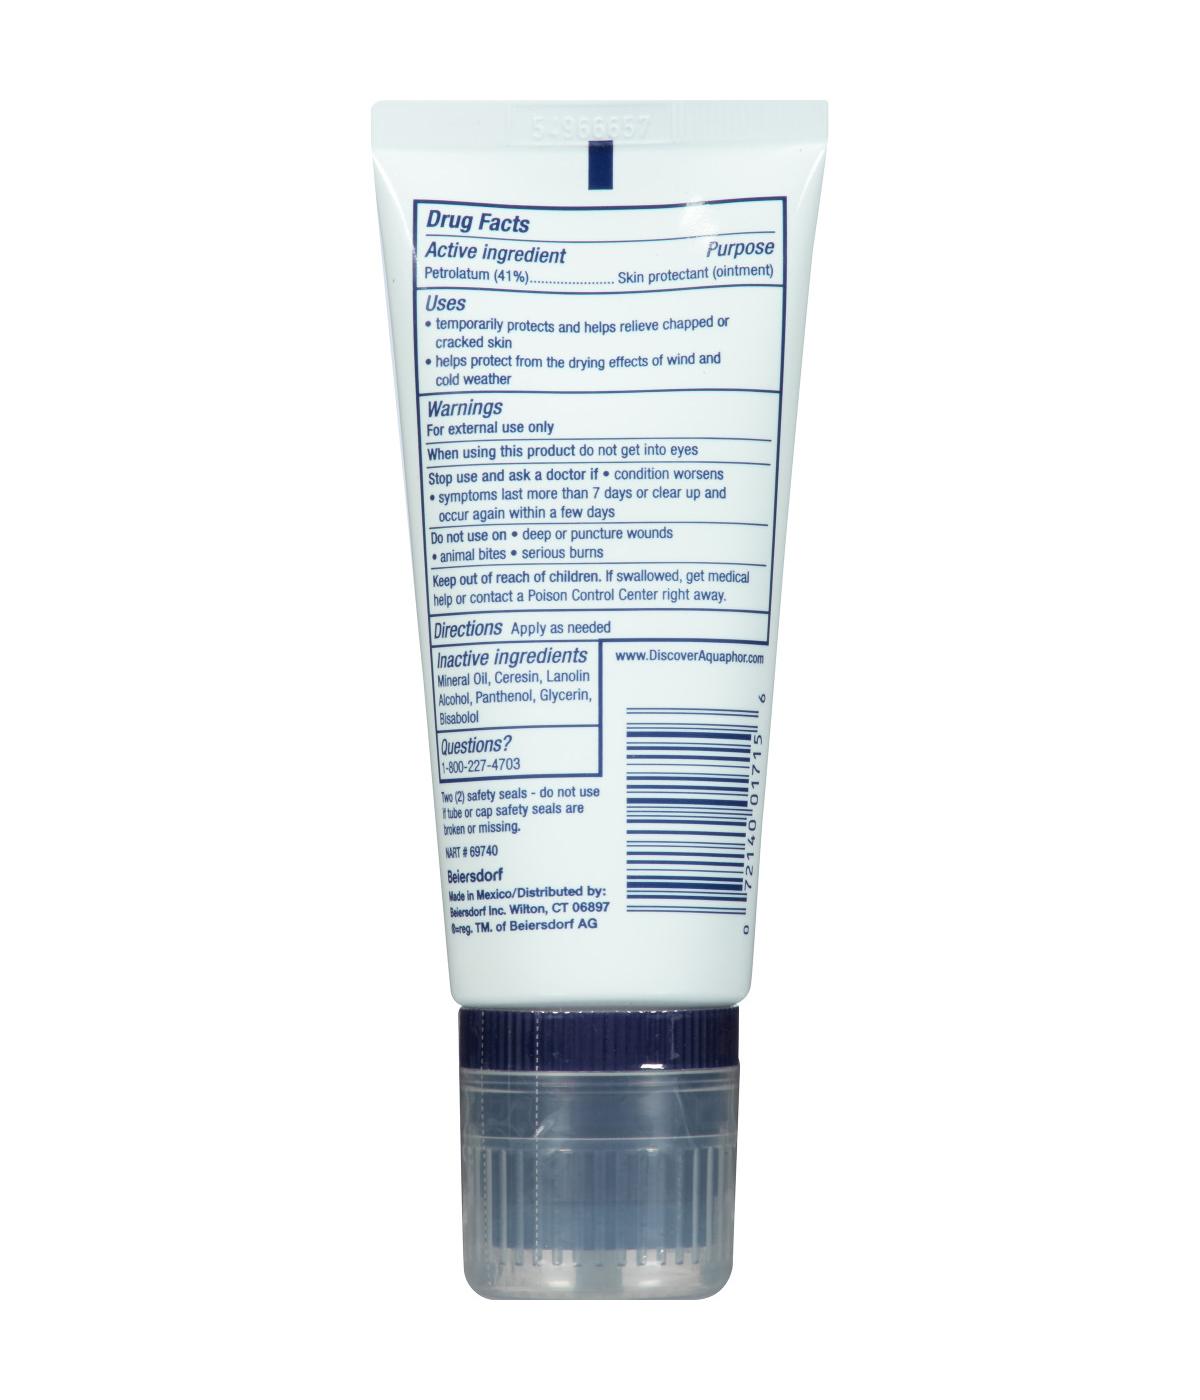 Aquaphor Healing Ointment with Touch-Free Applicator for Feet Tube; image 2 of 2